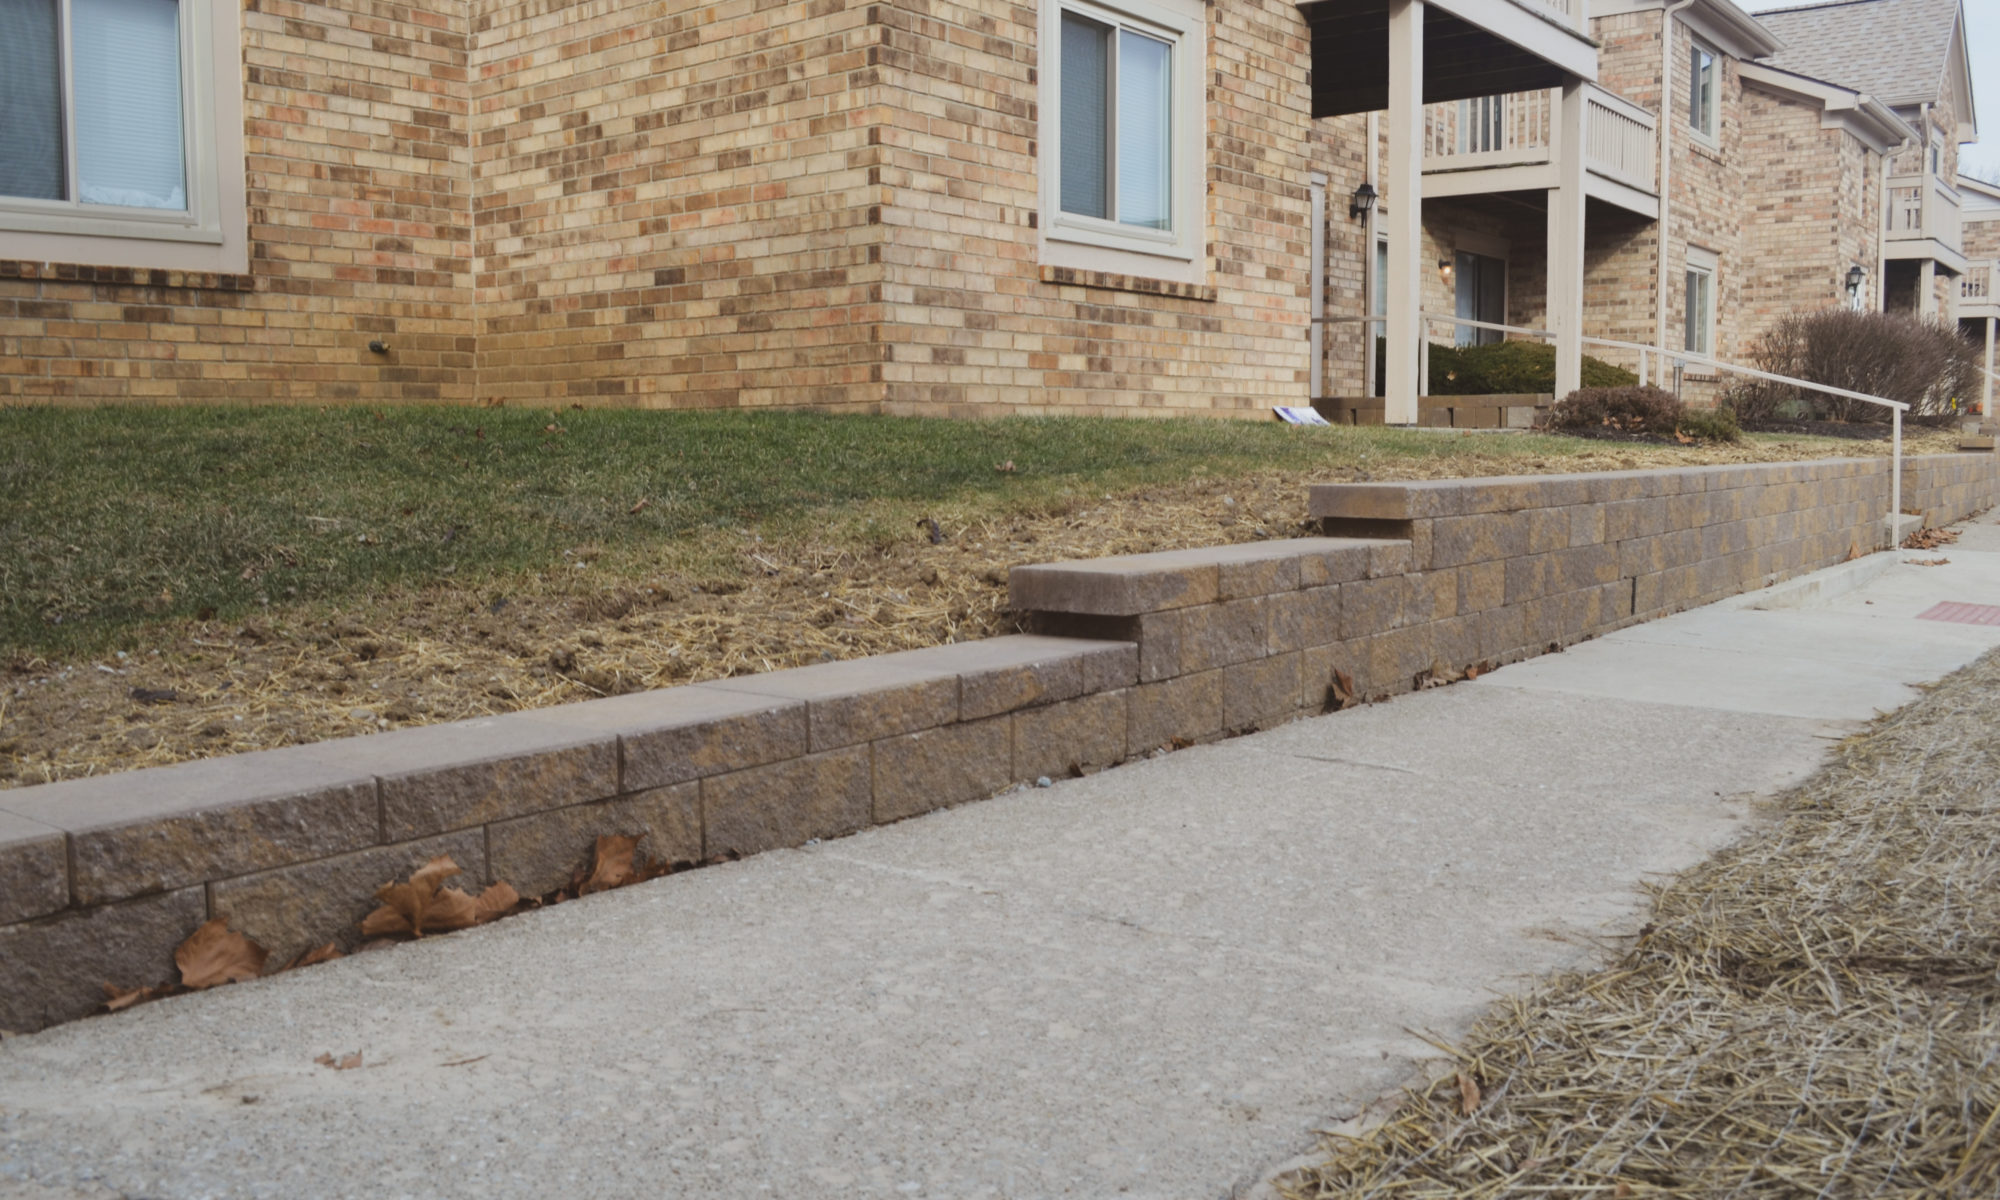 Mission Hills Apartment Greenwood Indiana Precision Outdoors Design Build Wall Retaining Landscaping Block